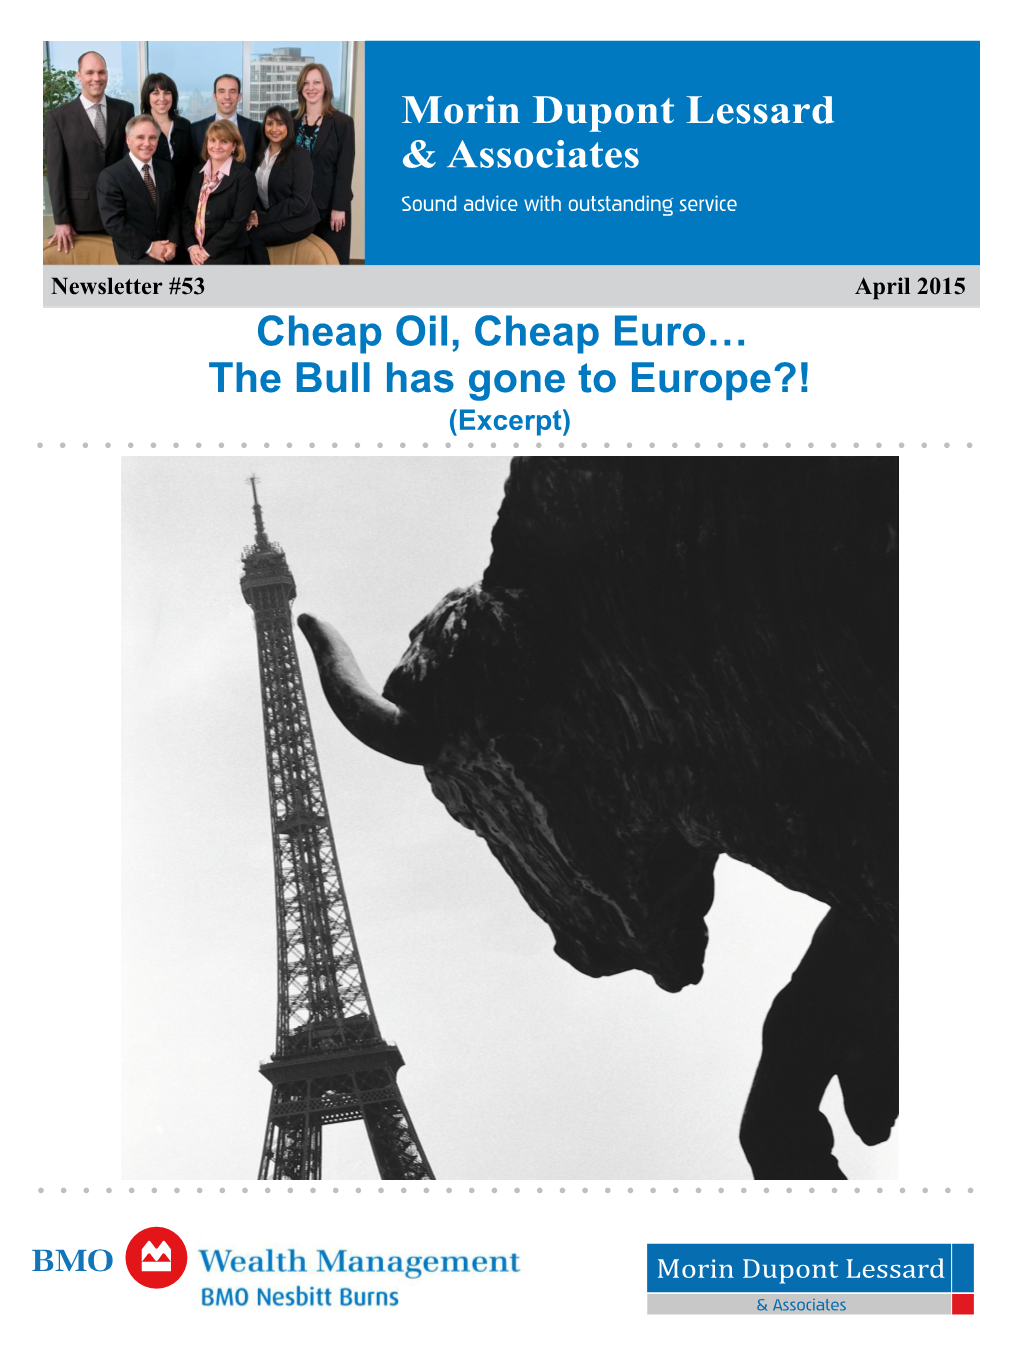 Cheap Oil, Cheap Euro… the Bull Has Gone to Europe?! (Excerpt) Table of Contents